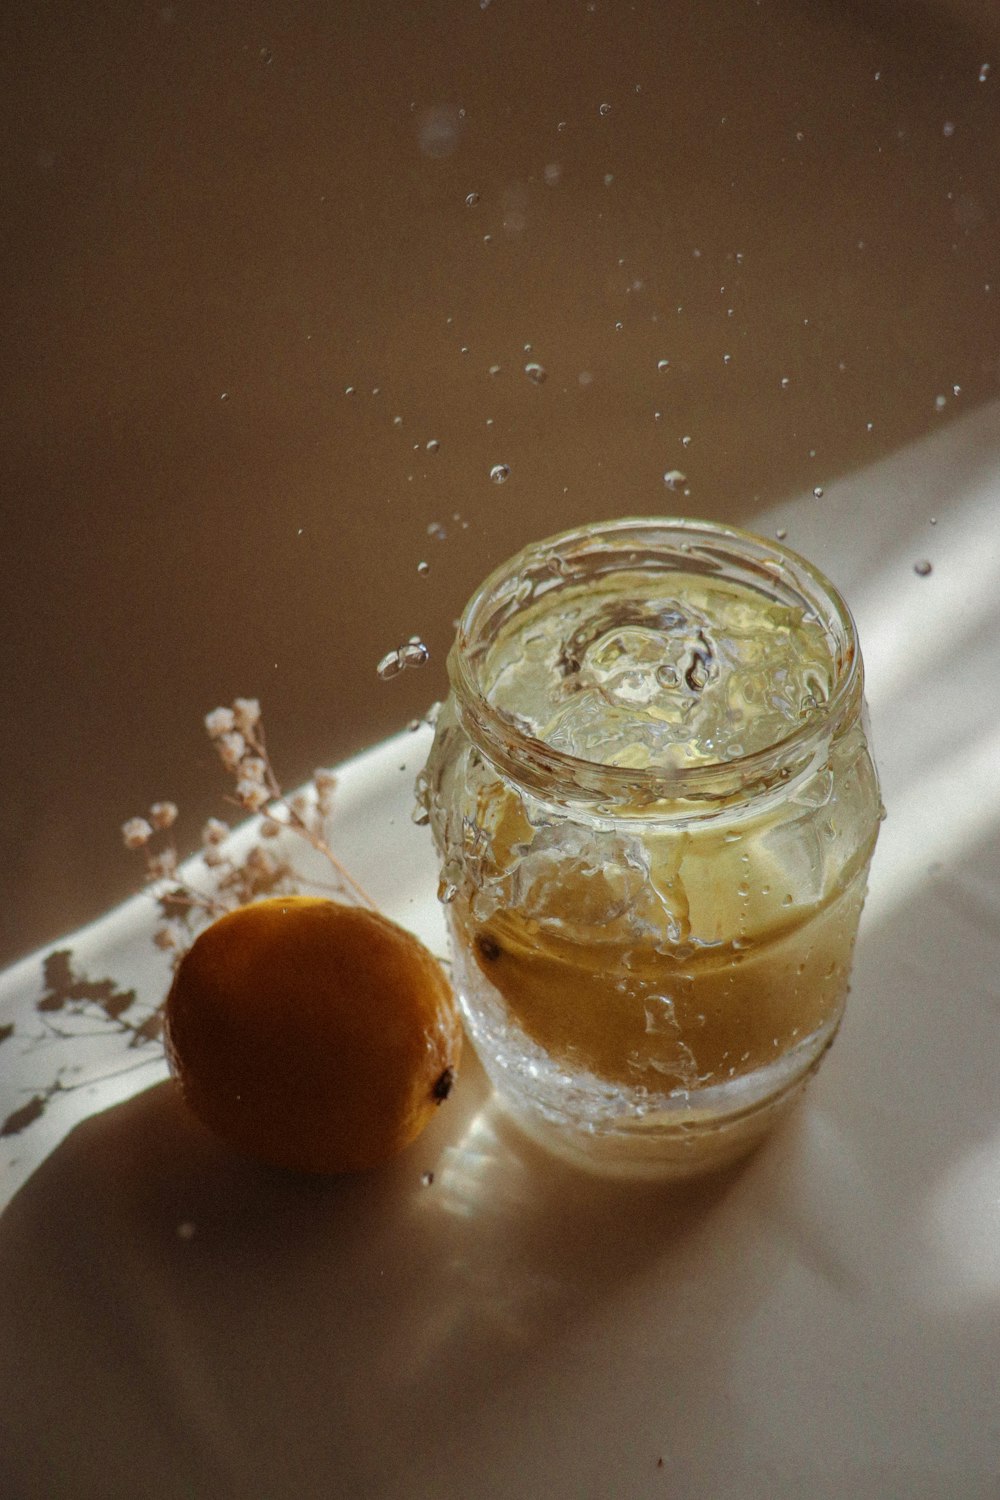 clear glass jar with brown liquid